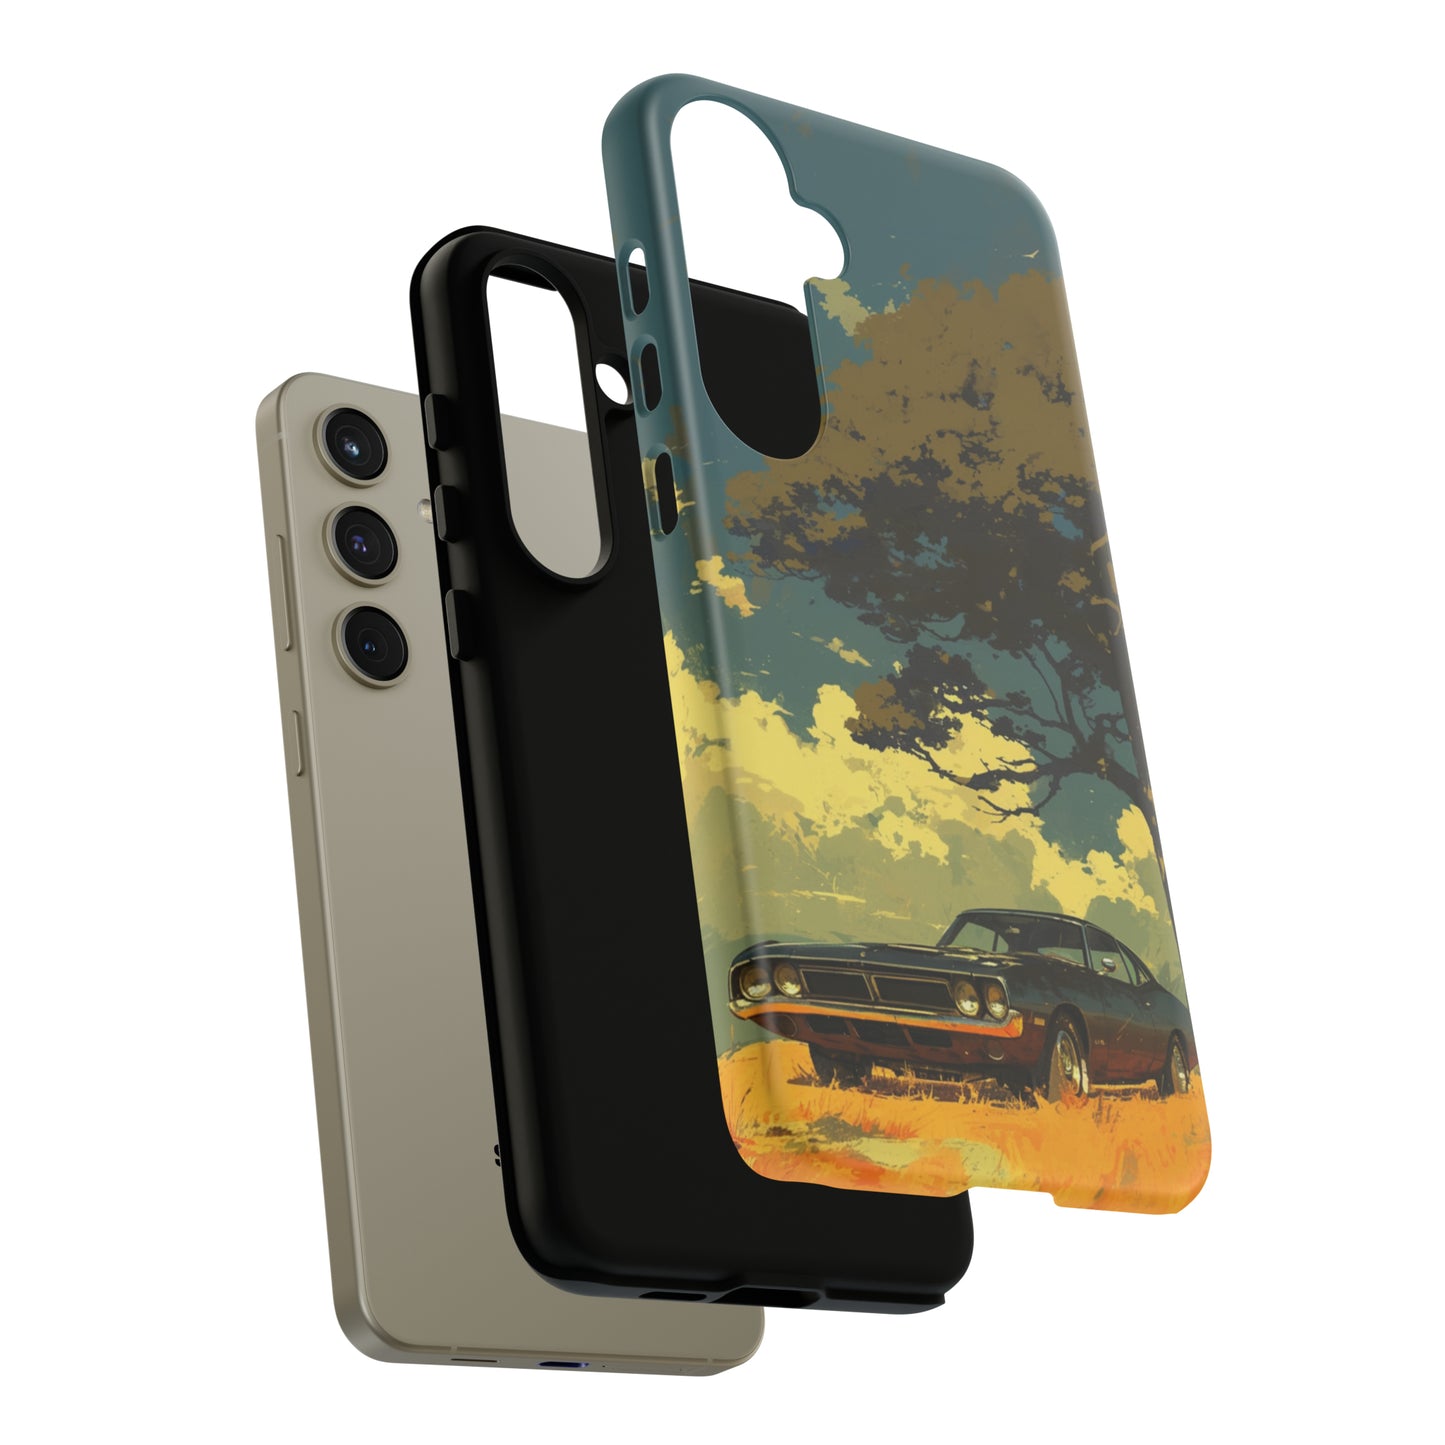 Retro Road Trip: Vintage Plymouth Hemi and Sunset Silhouette Phone Case For iPhone, Samsung Galaxy, & Google Pixel Phones